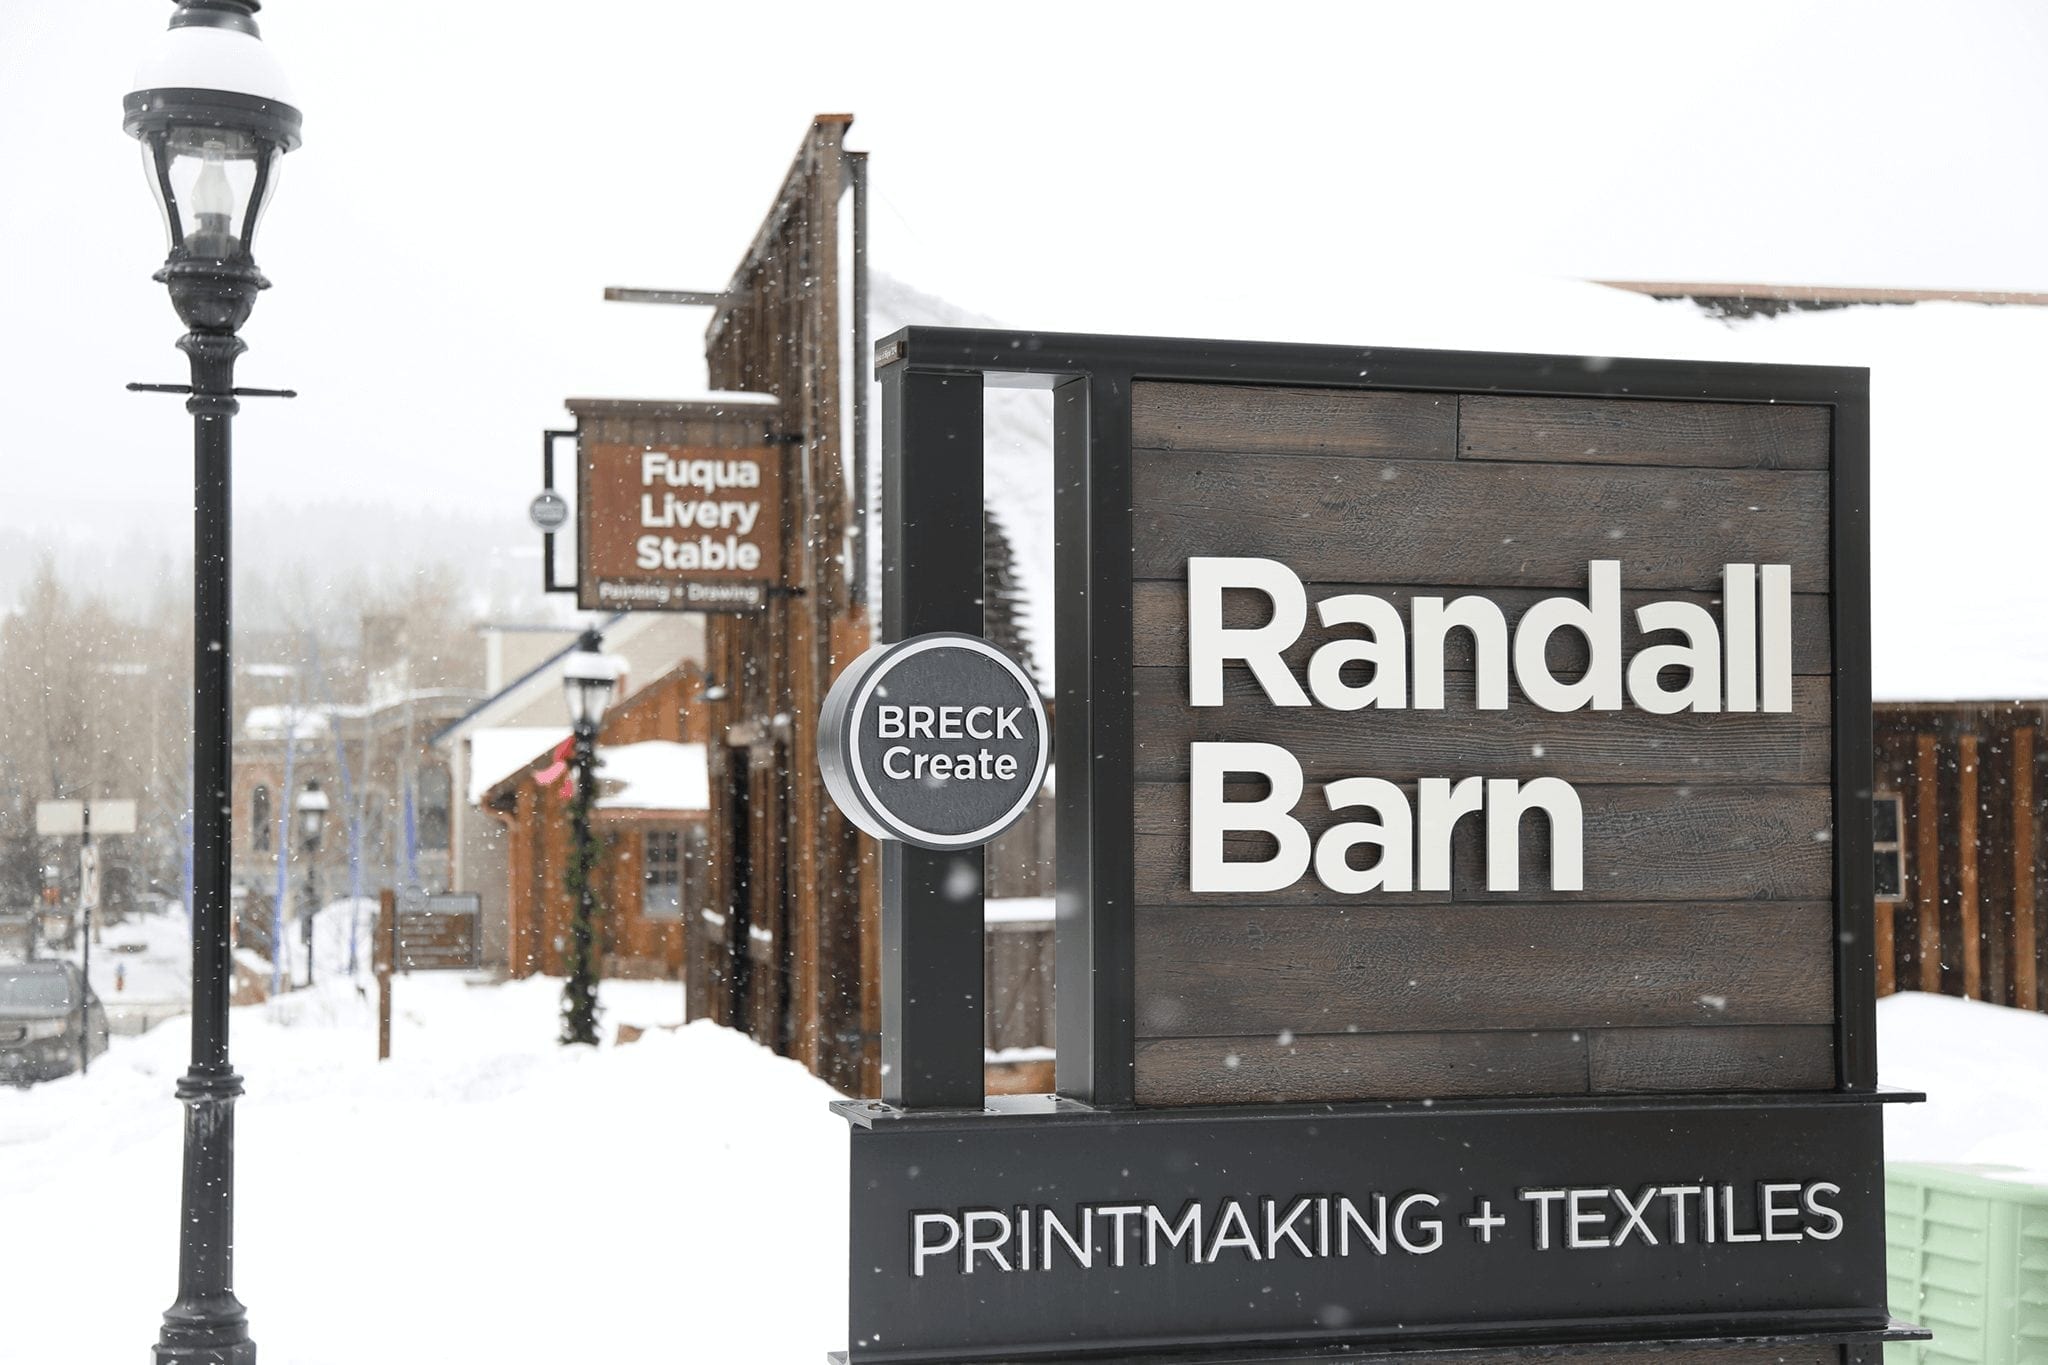 Randall Barn Printmaking and Textiles sign. The Arts District on a snowy day.